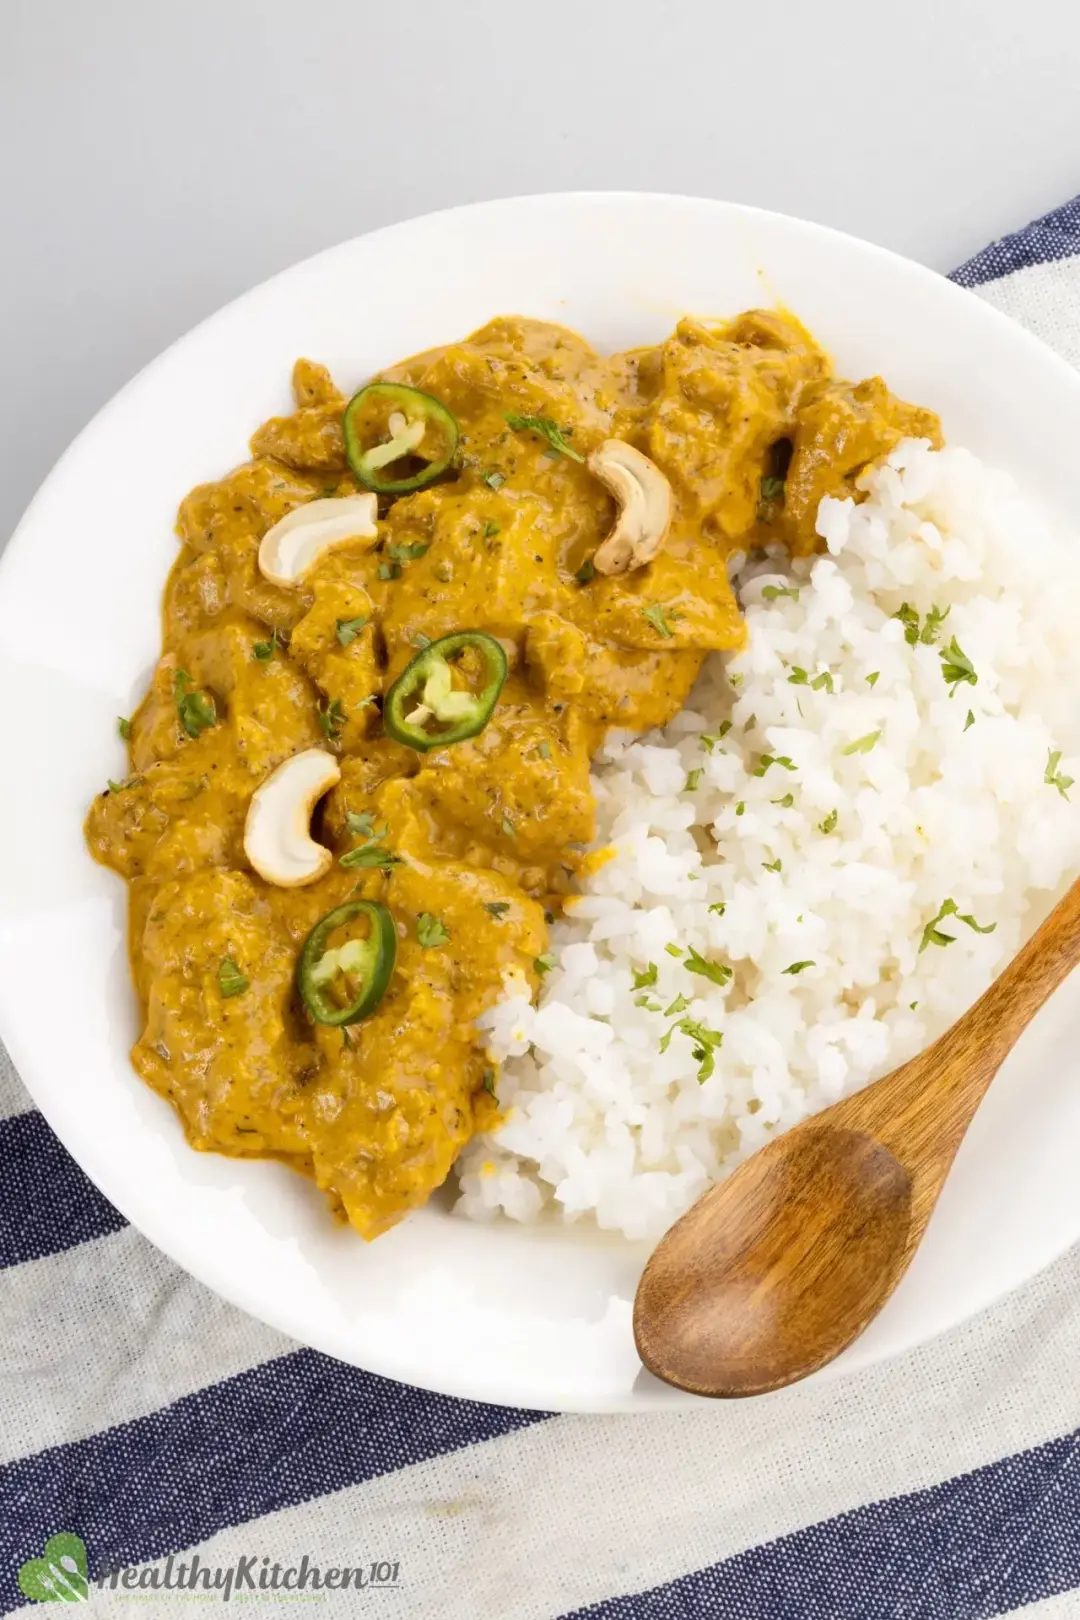 A plate of chicken korma and cooked rice, with a wooden spoon